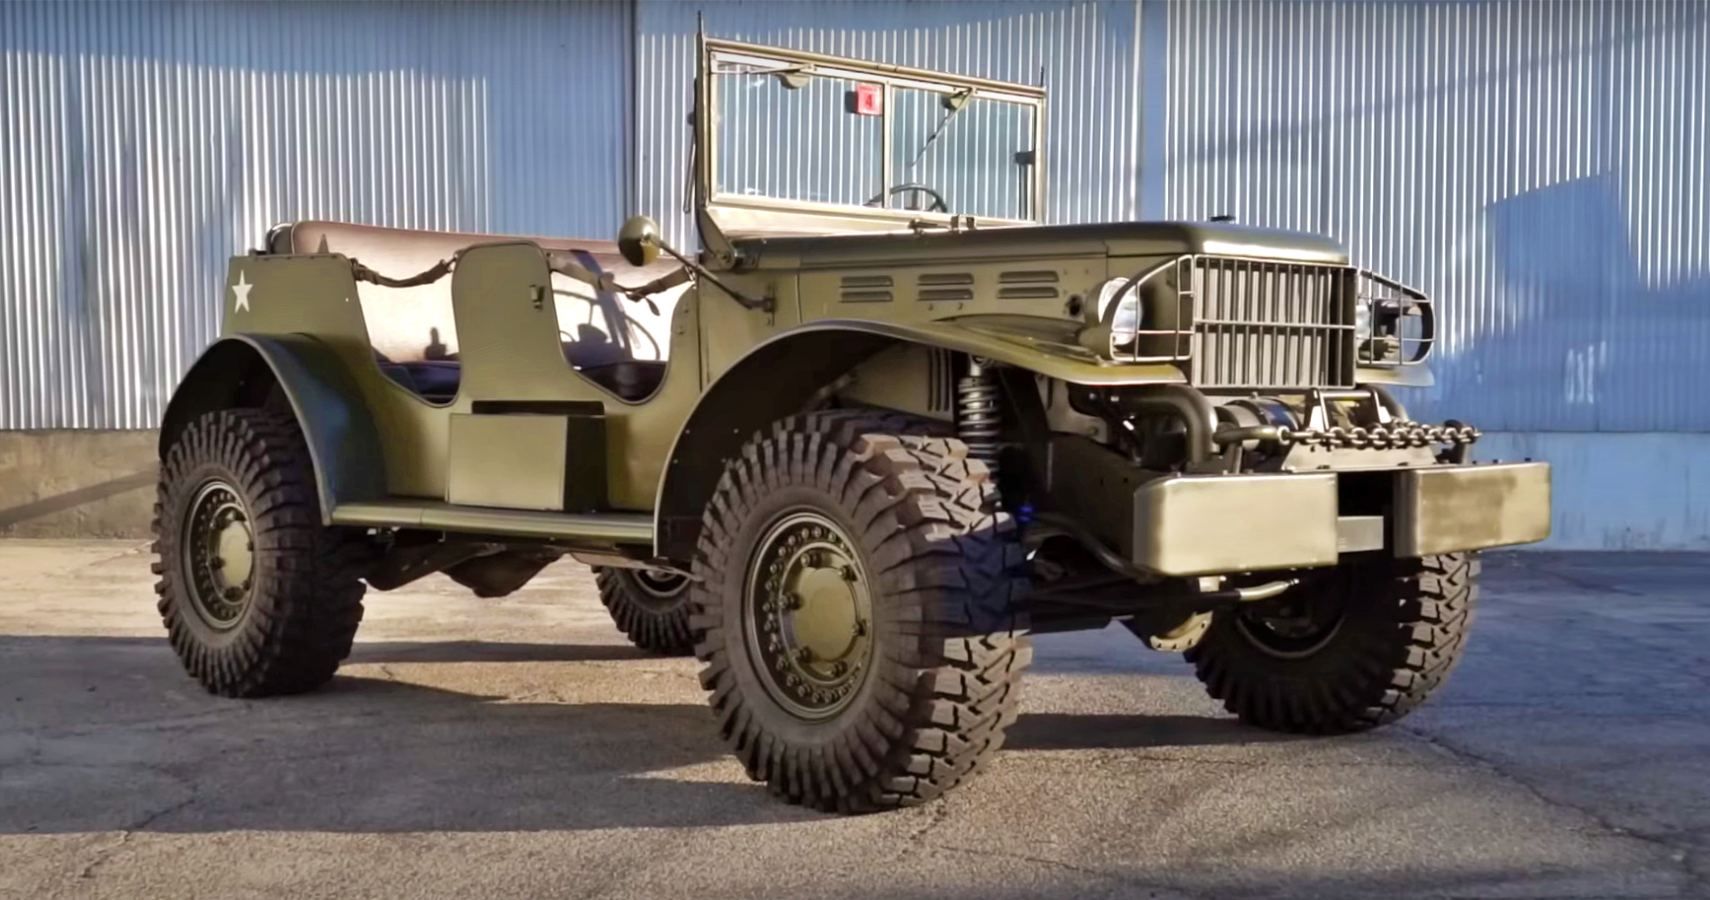 This Cummins Diesel Swapped Dodge Power Wagon Is The Ultimate Beach Buggy